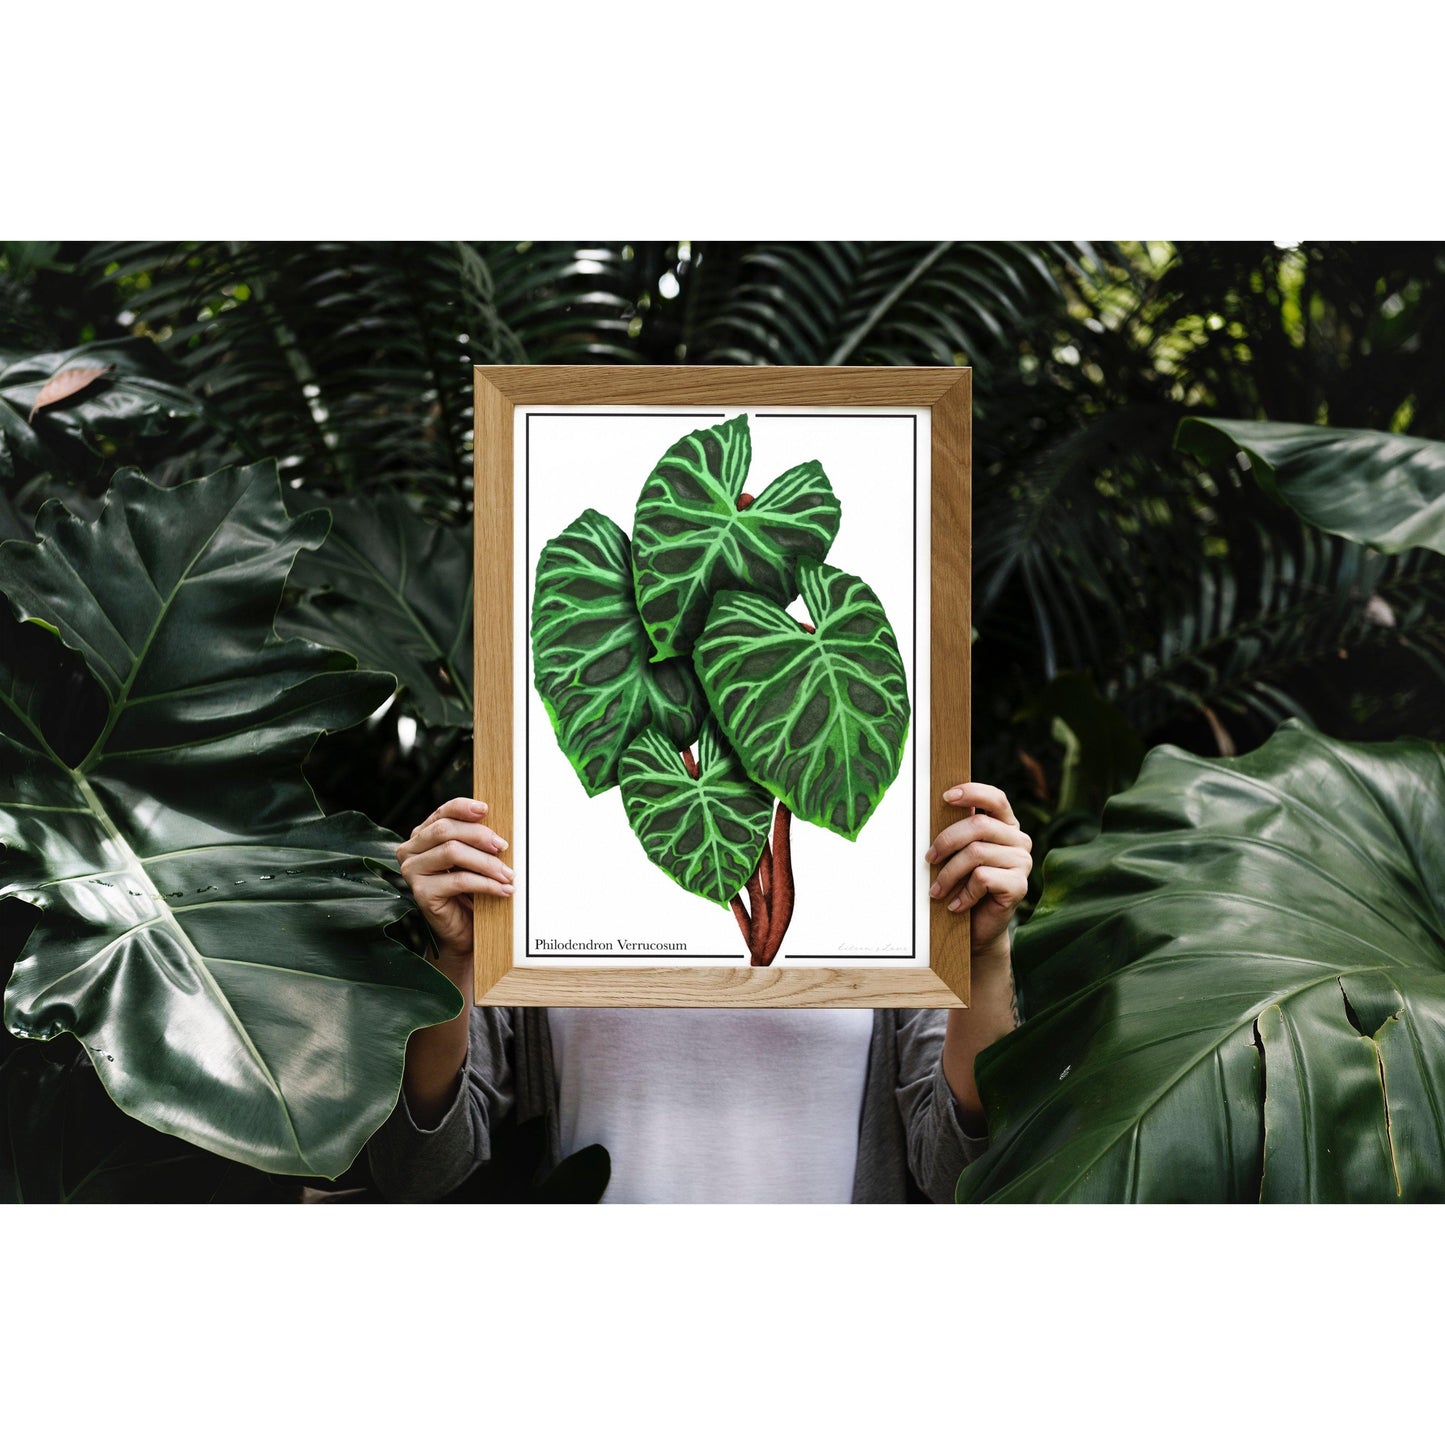 Philodendron Verrucosum - Luxe Foliage